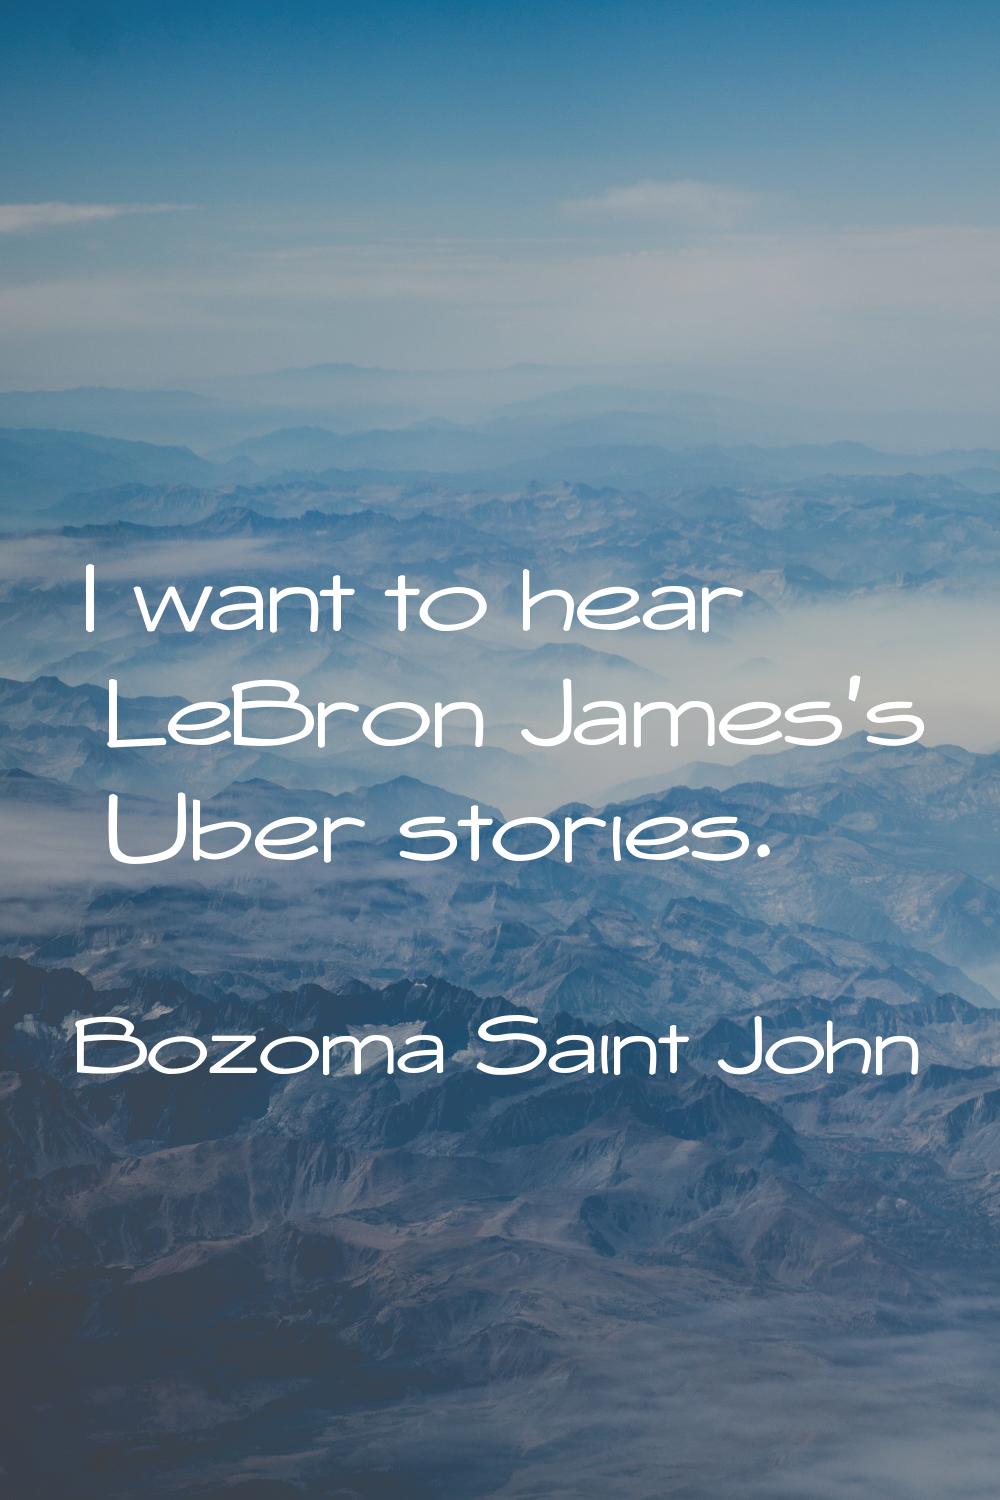 I want to hear LeBron James's Uber stories.